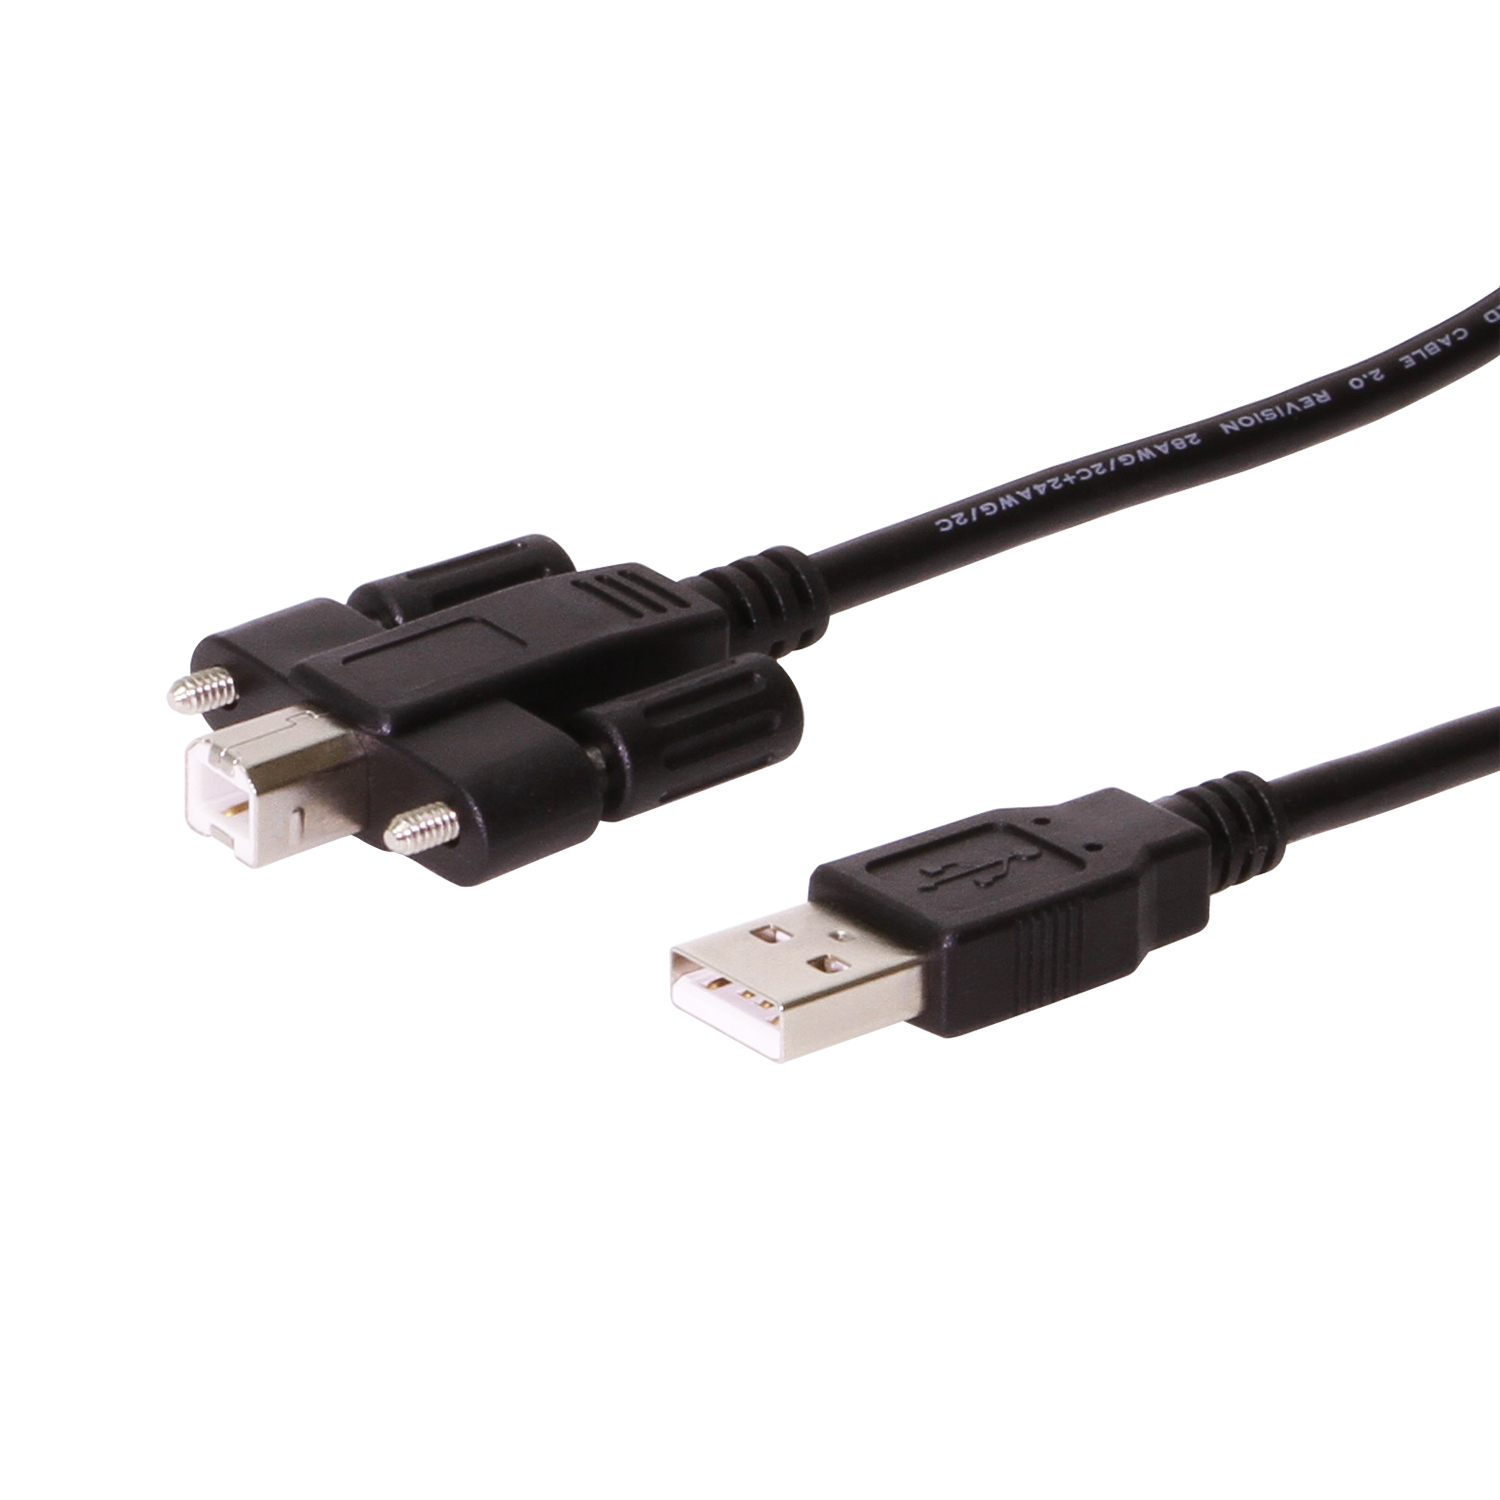 8in. USB 3.2 Gen 2 Type-C Male to Female High Quality Panel Mount Cable